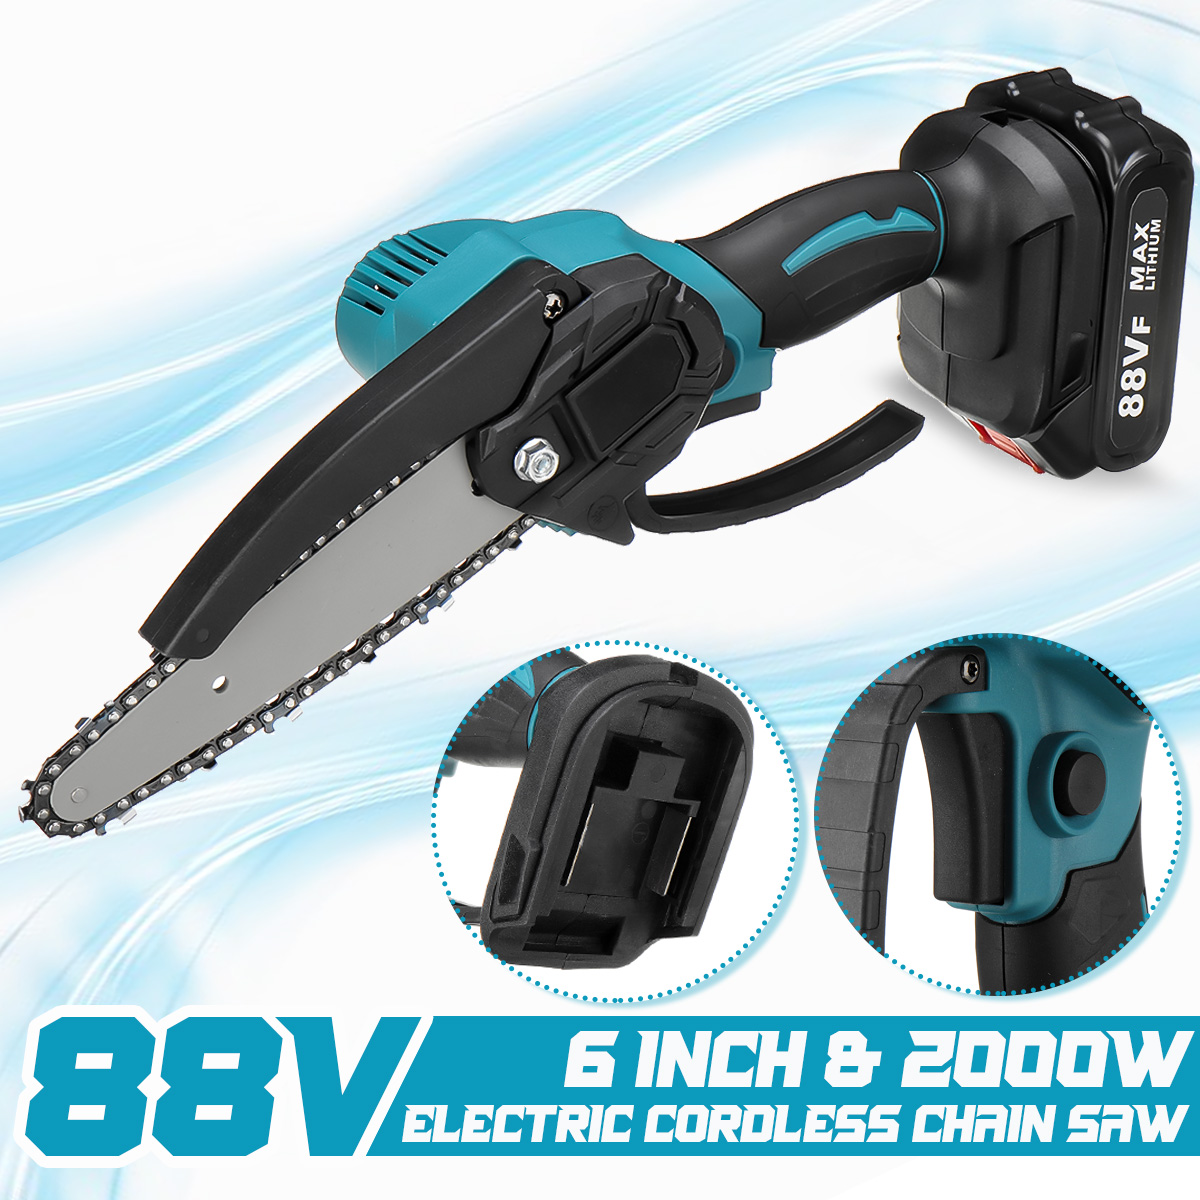 VIOLEWORK-6-88VF-Electric-Chain-Saw-Rechargable-Chainsaws-One-handed-Lithoum-Battery-Wood-Cutter-Wit-1849784-4